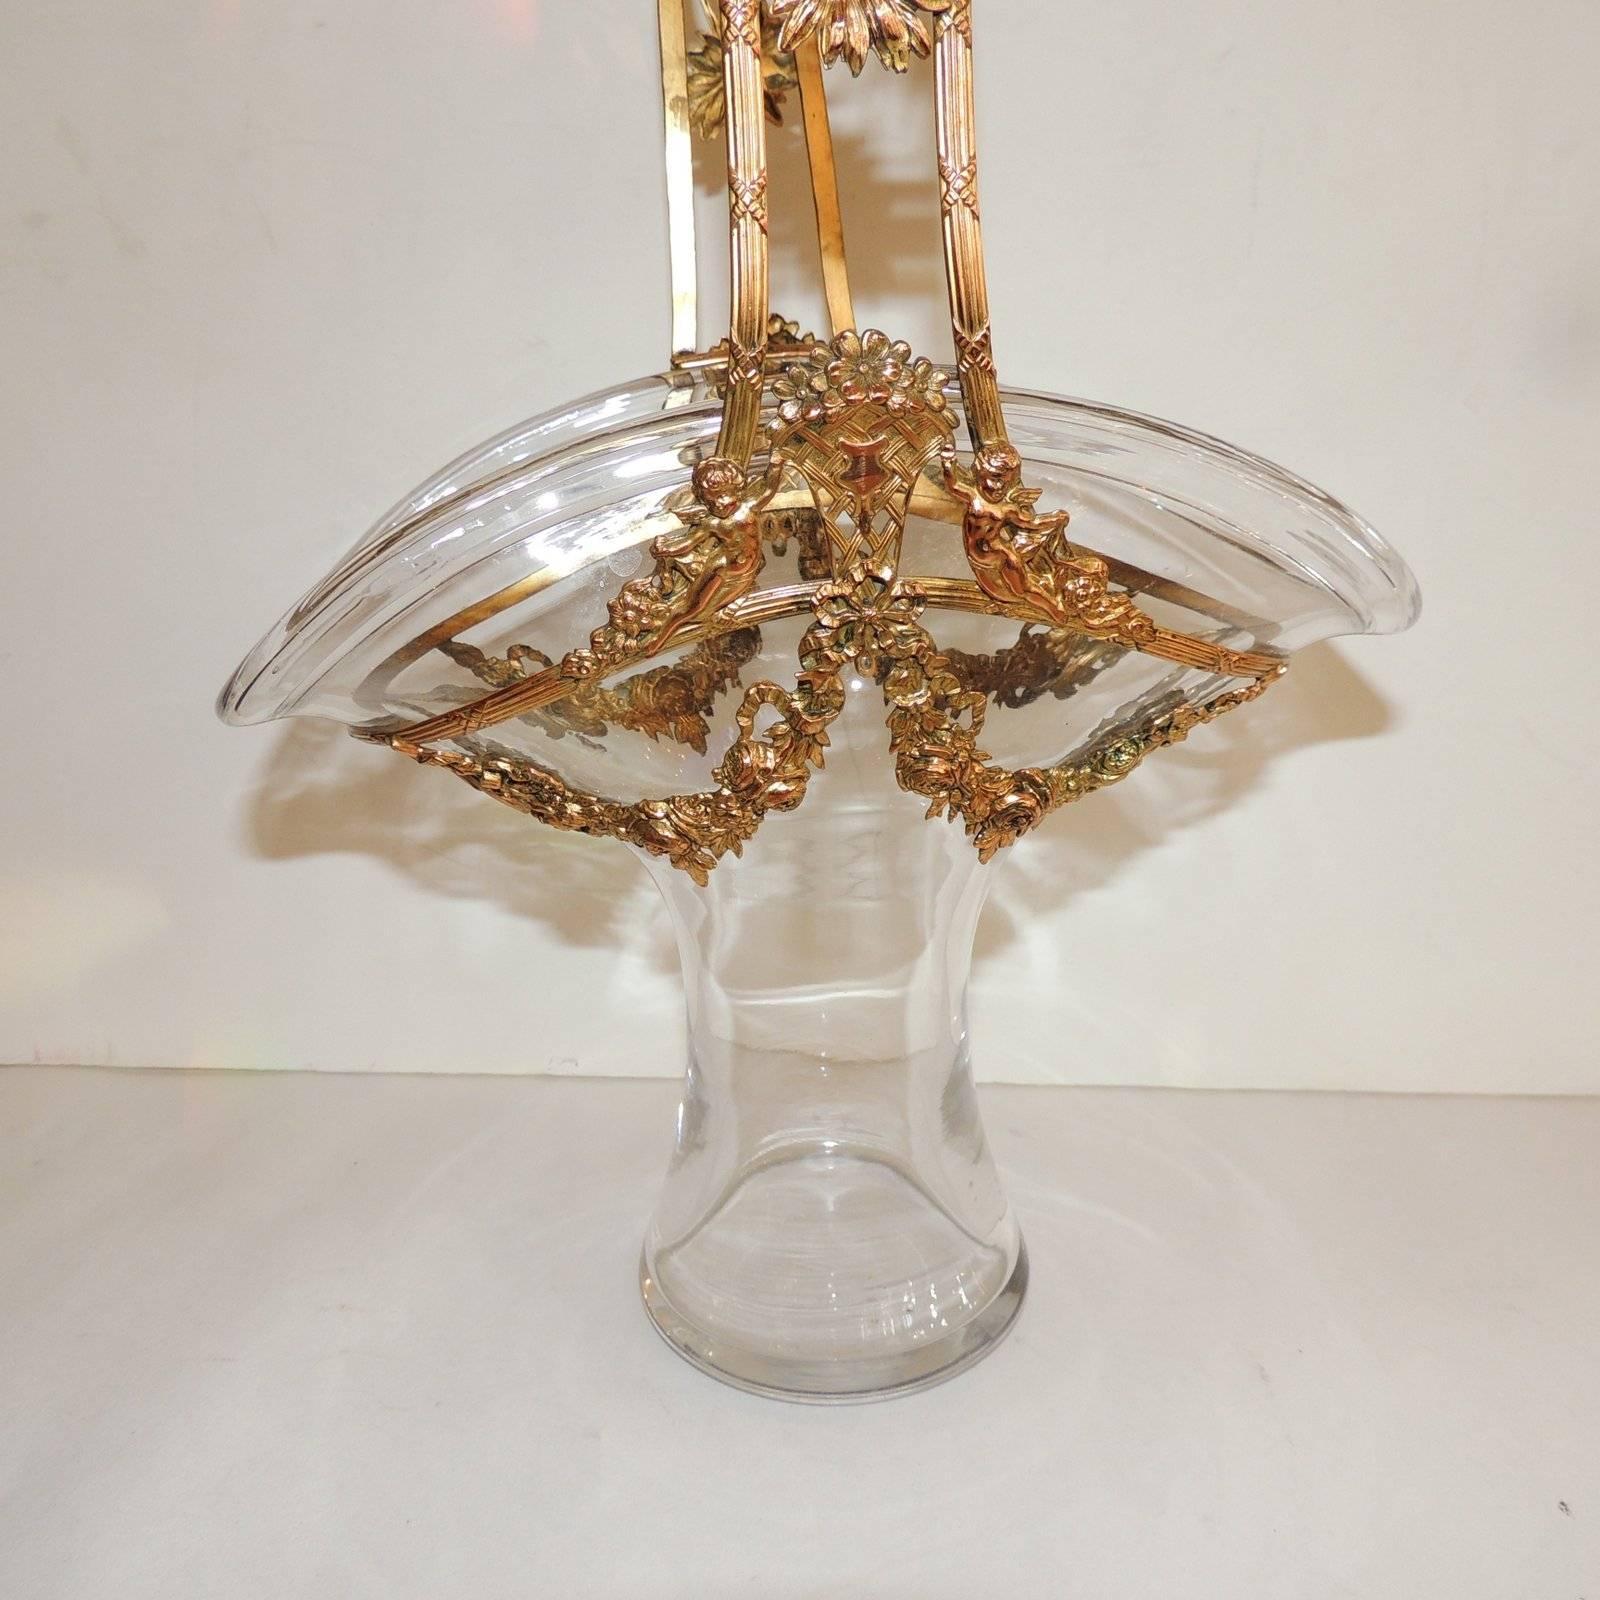 Belle Époque Wonderful French Ormolu Floral and Putti Gilt Bronze Basket with Crystal Insert  For Sale